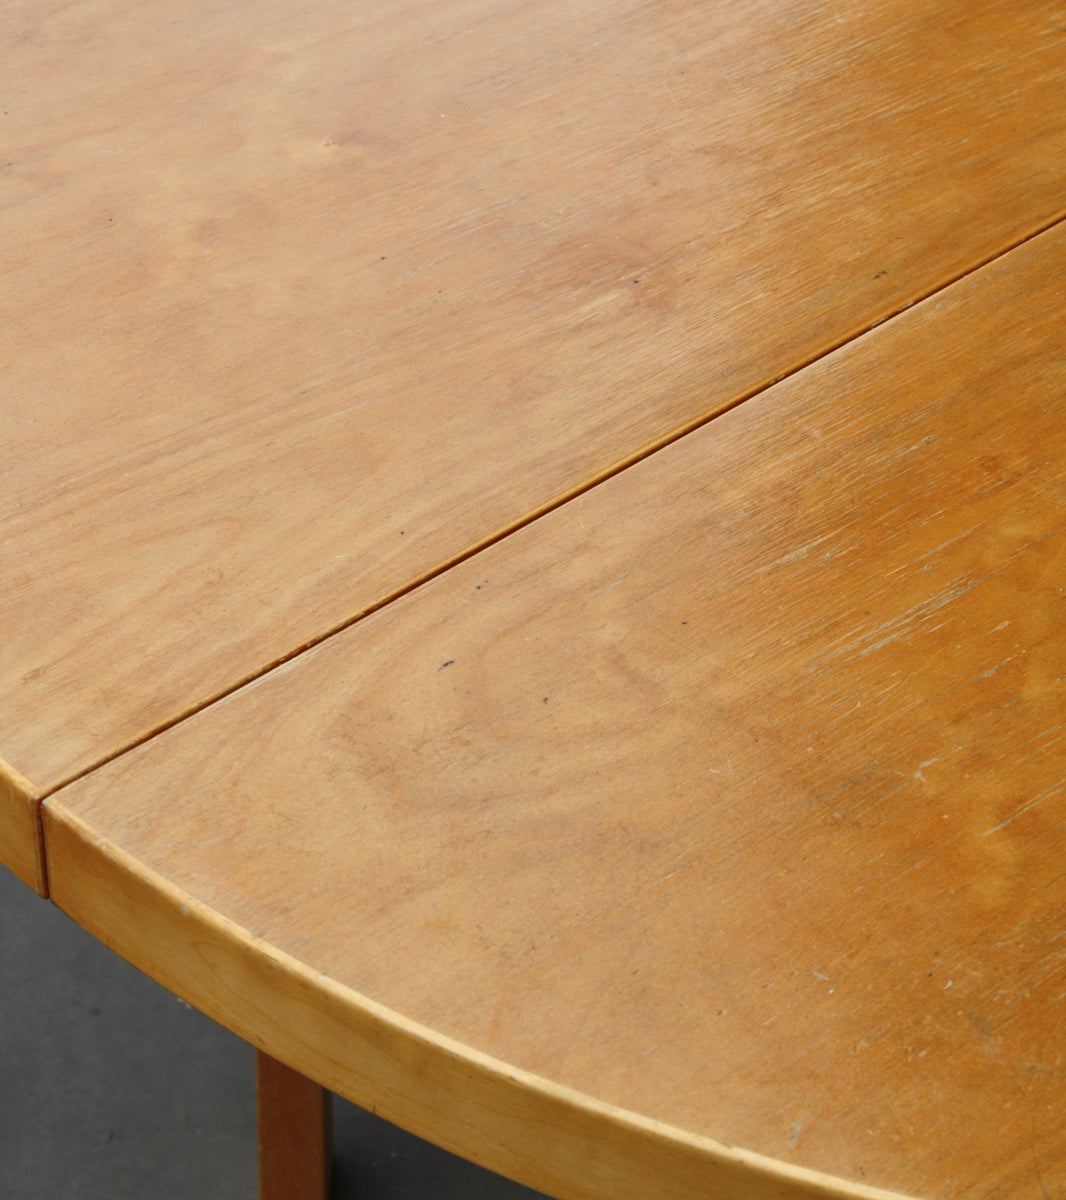 Extendable Circular Aalto Table with Wartime Finger-Joint 'L-legs'